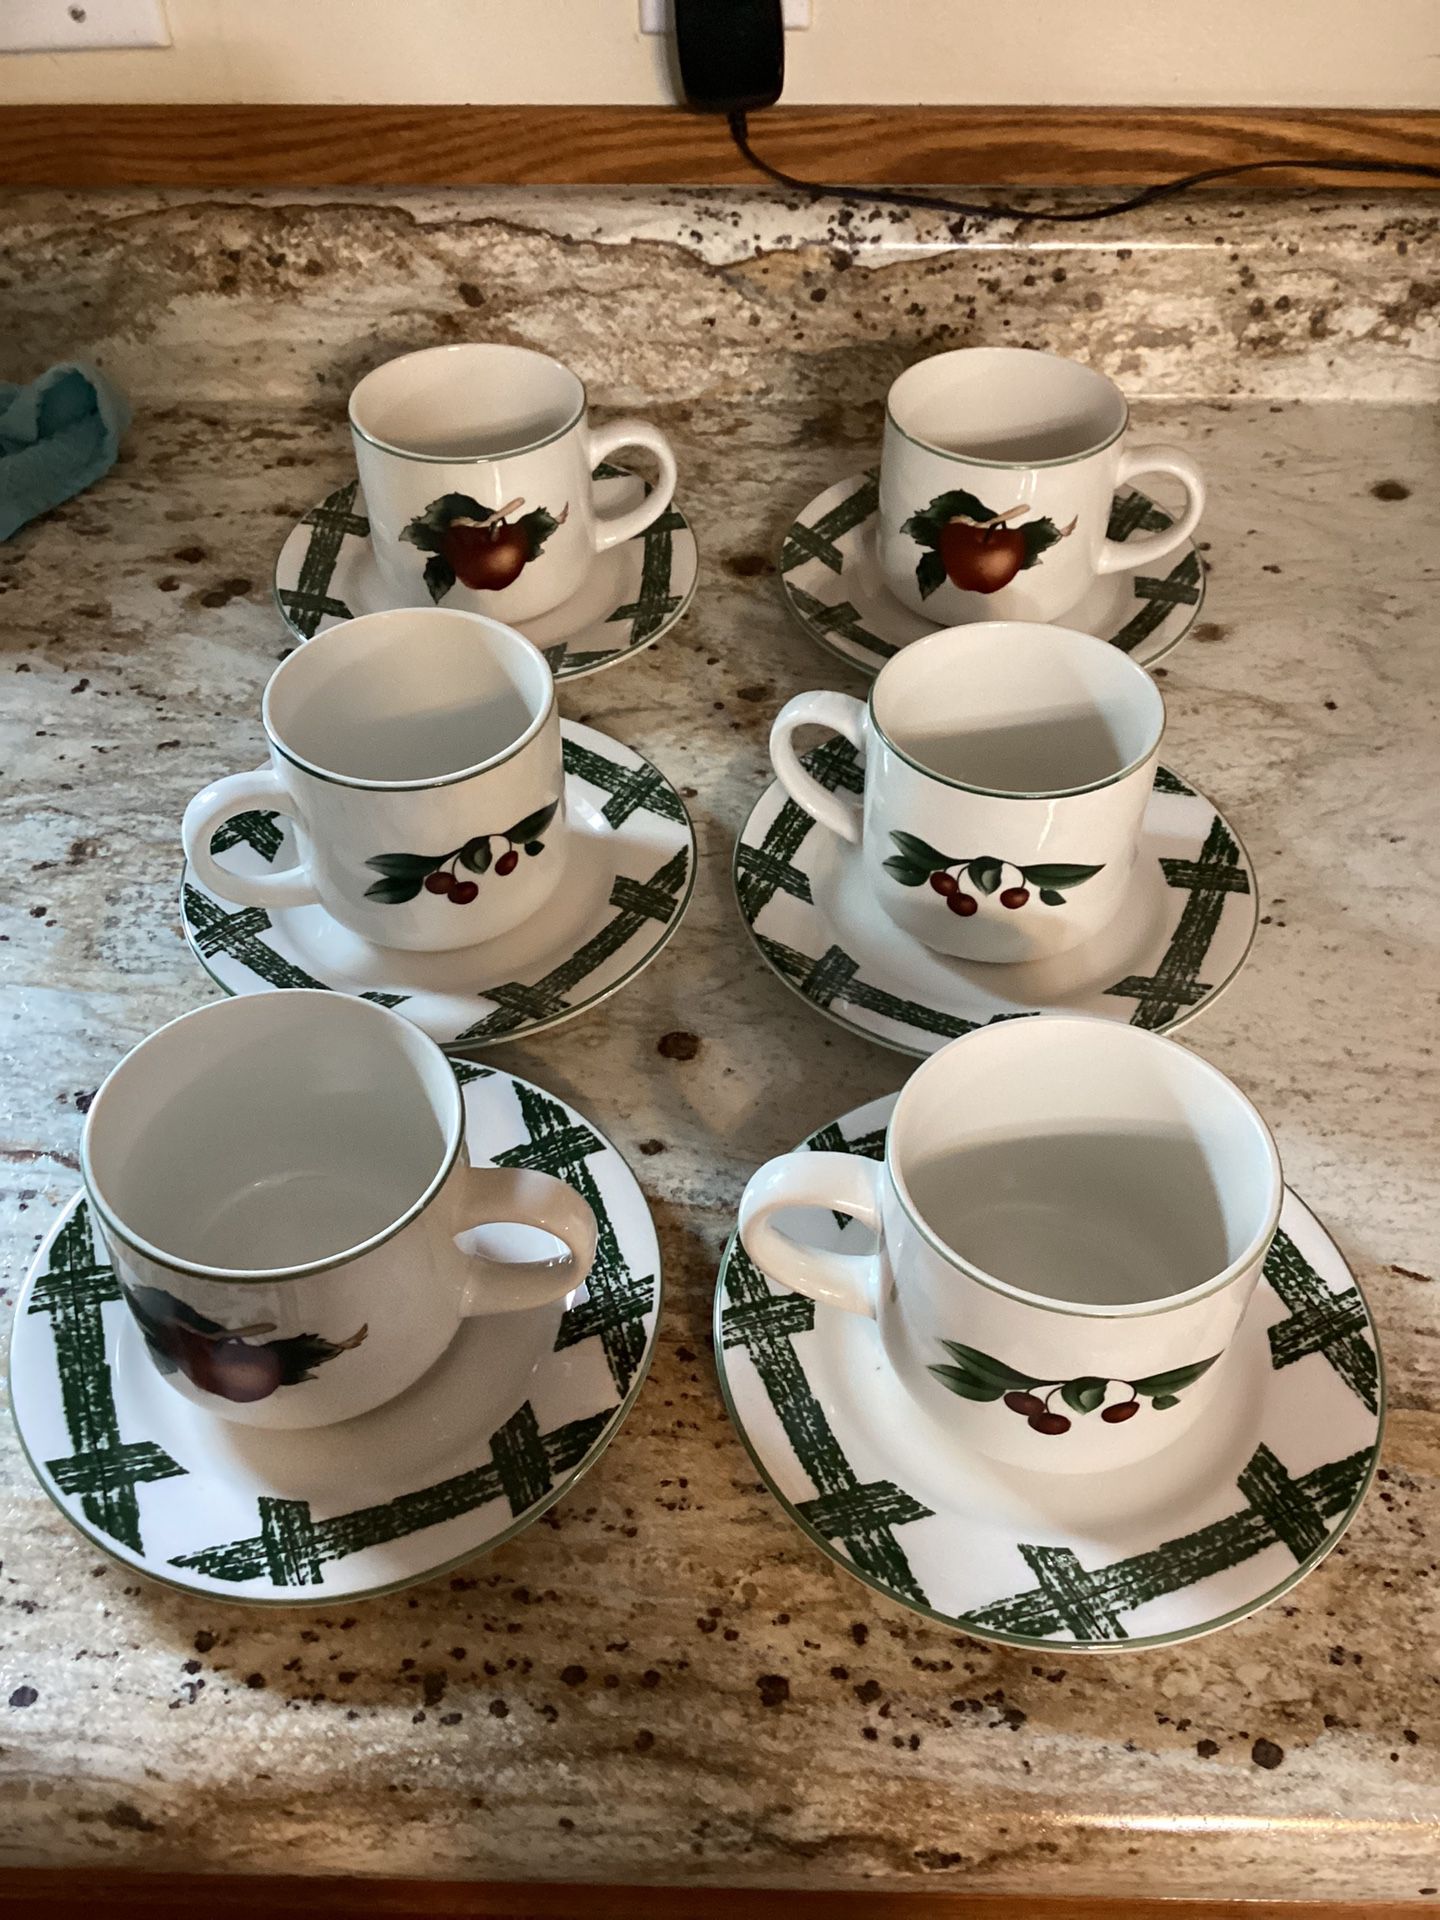 The Cades Cove Collection coffee cups and saucers set